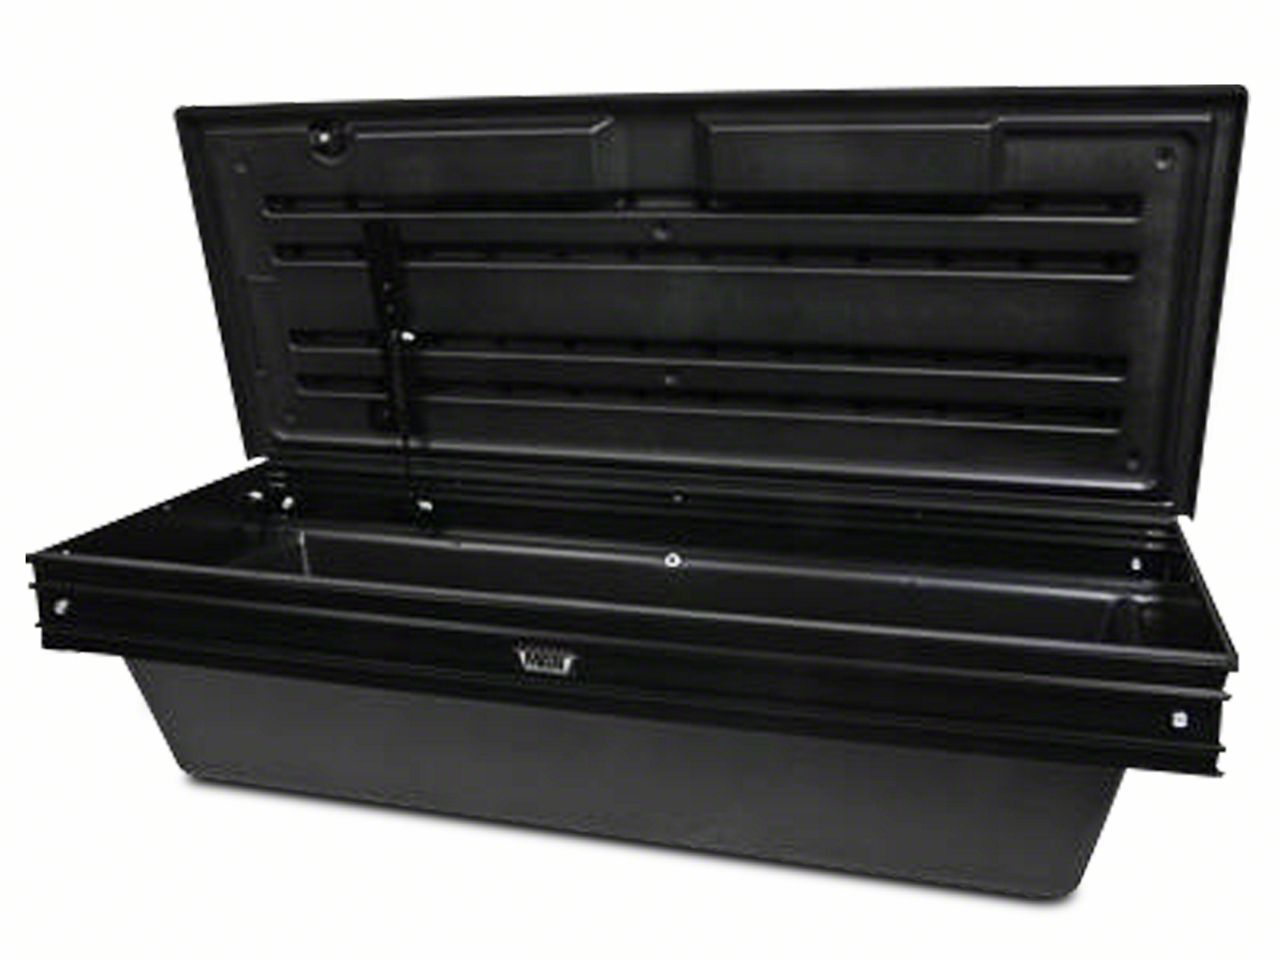 Ram3500 Tool Boxes & Bed Storage 2003-2009